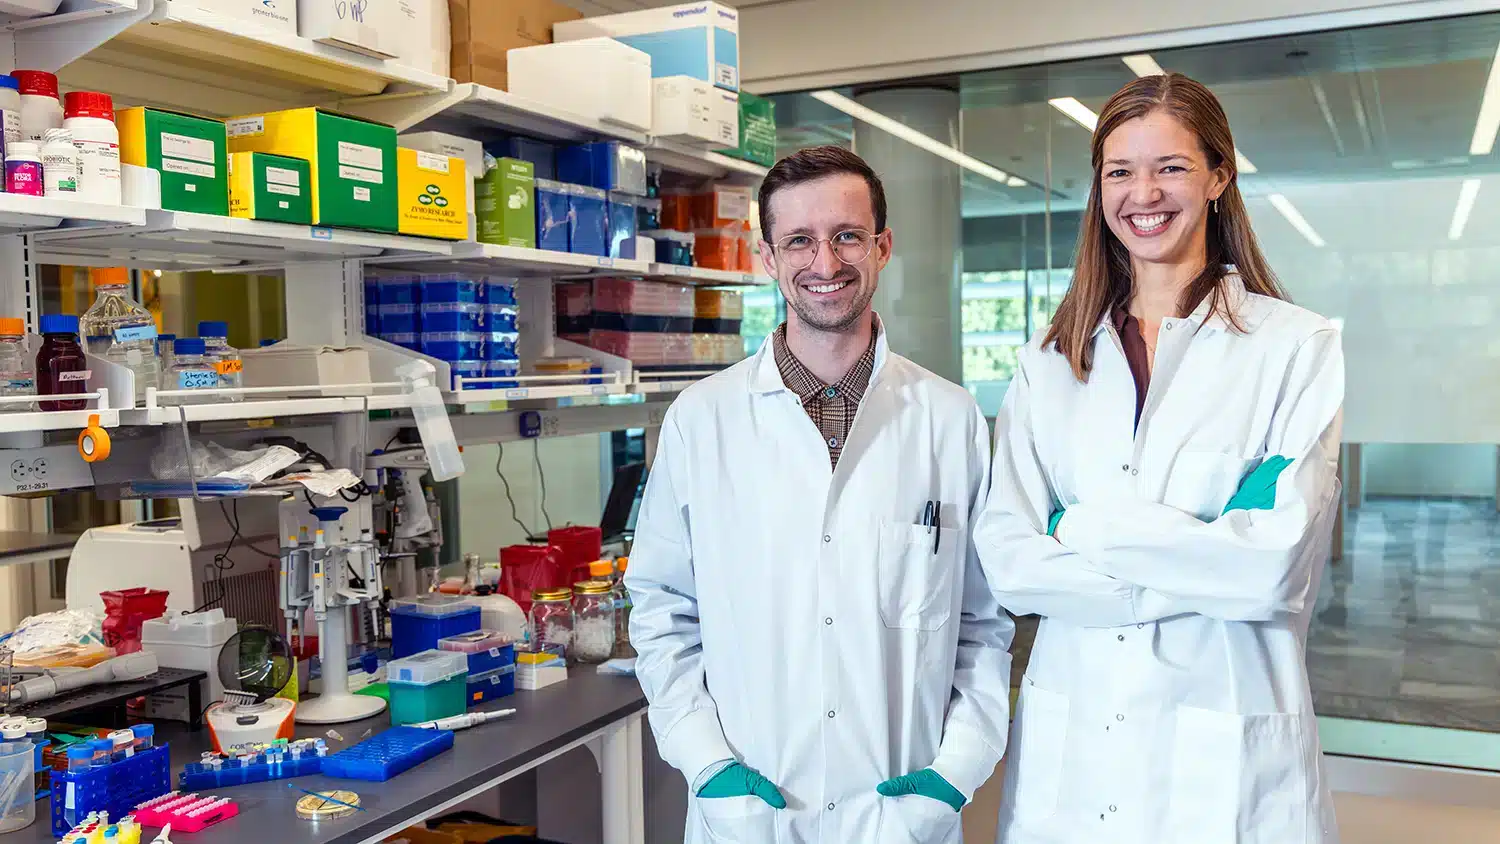 Alumni Scott Collins and Kathryn Polkoff, the co-founders of biotech company Hoofprint.